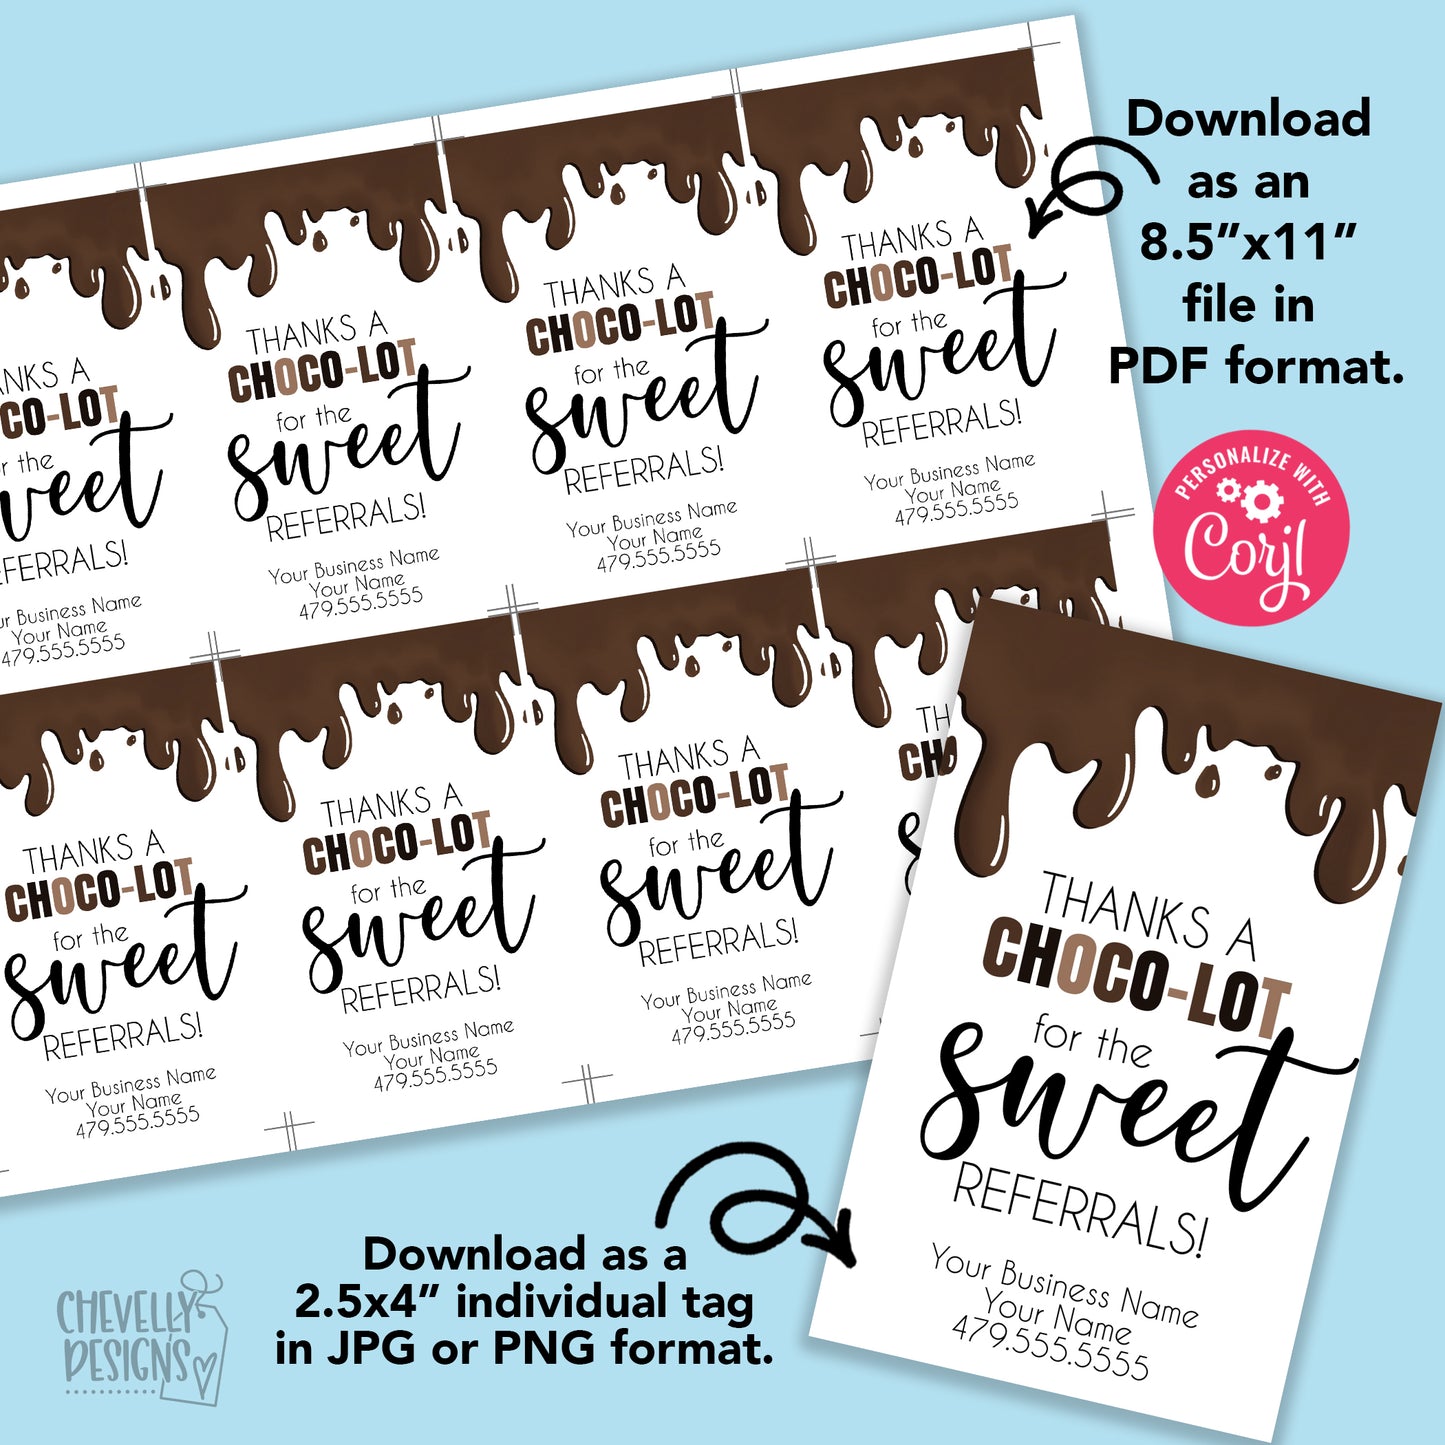 EDITABLE - Thanks a Choco-LOT for the Sweet Referrals - Printable Business Marketing Tags